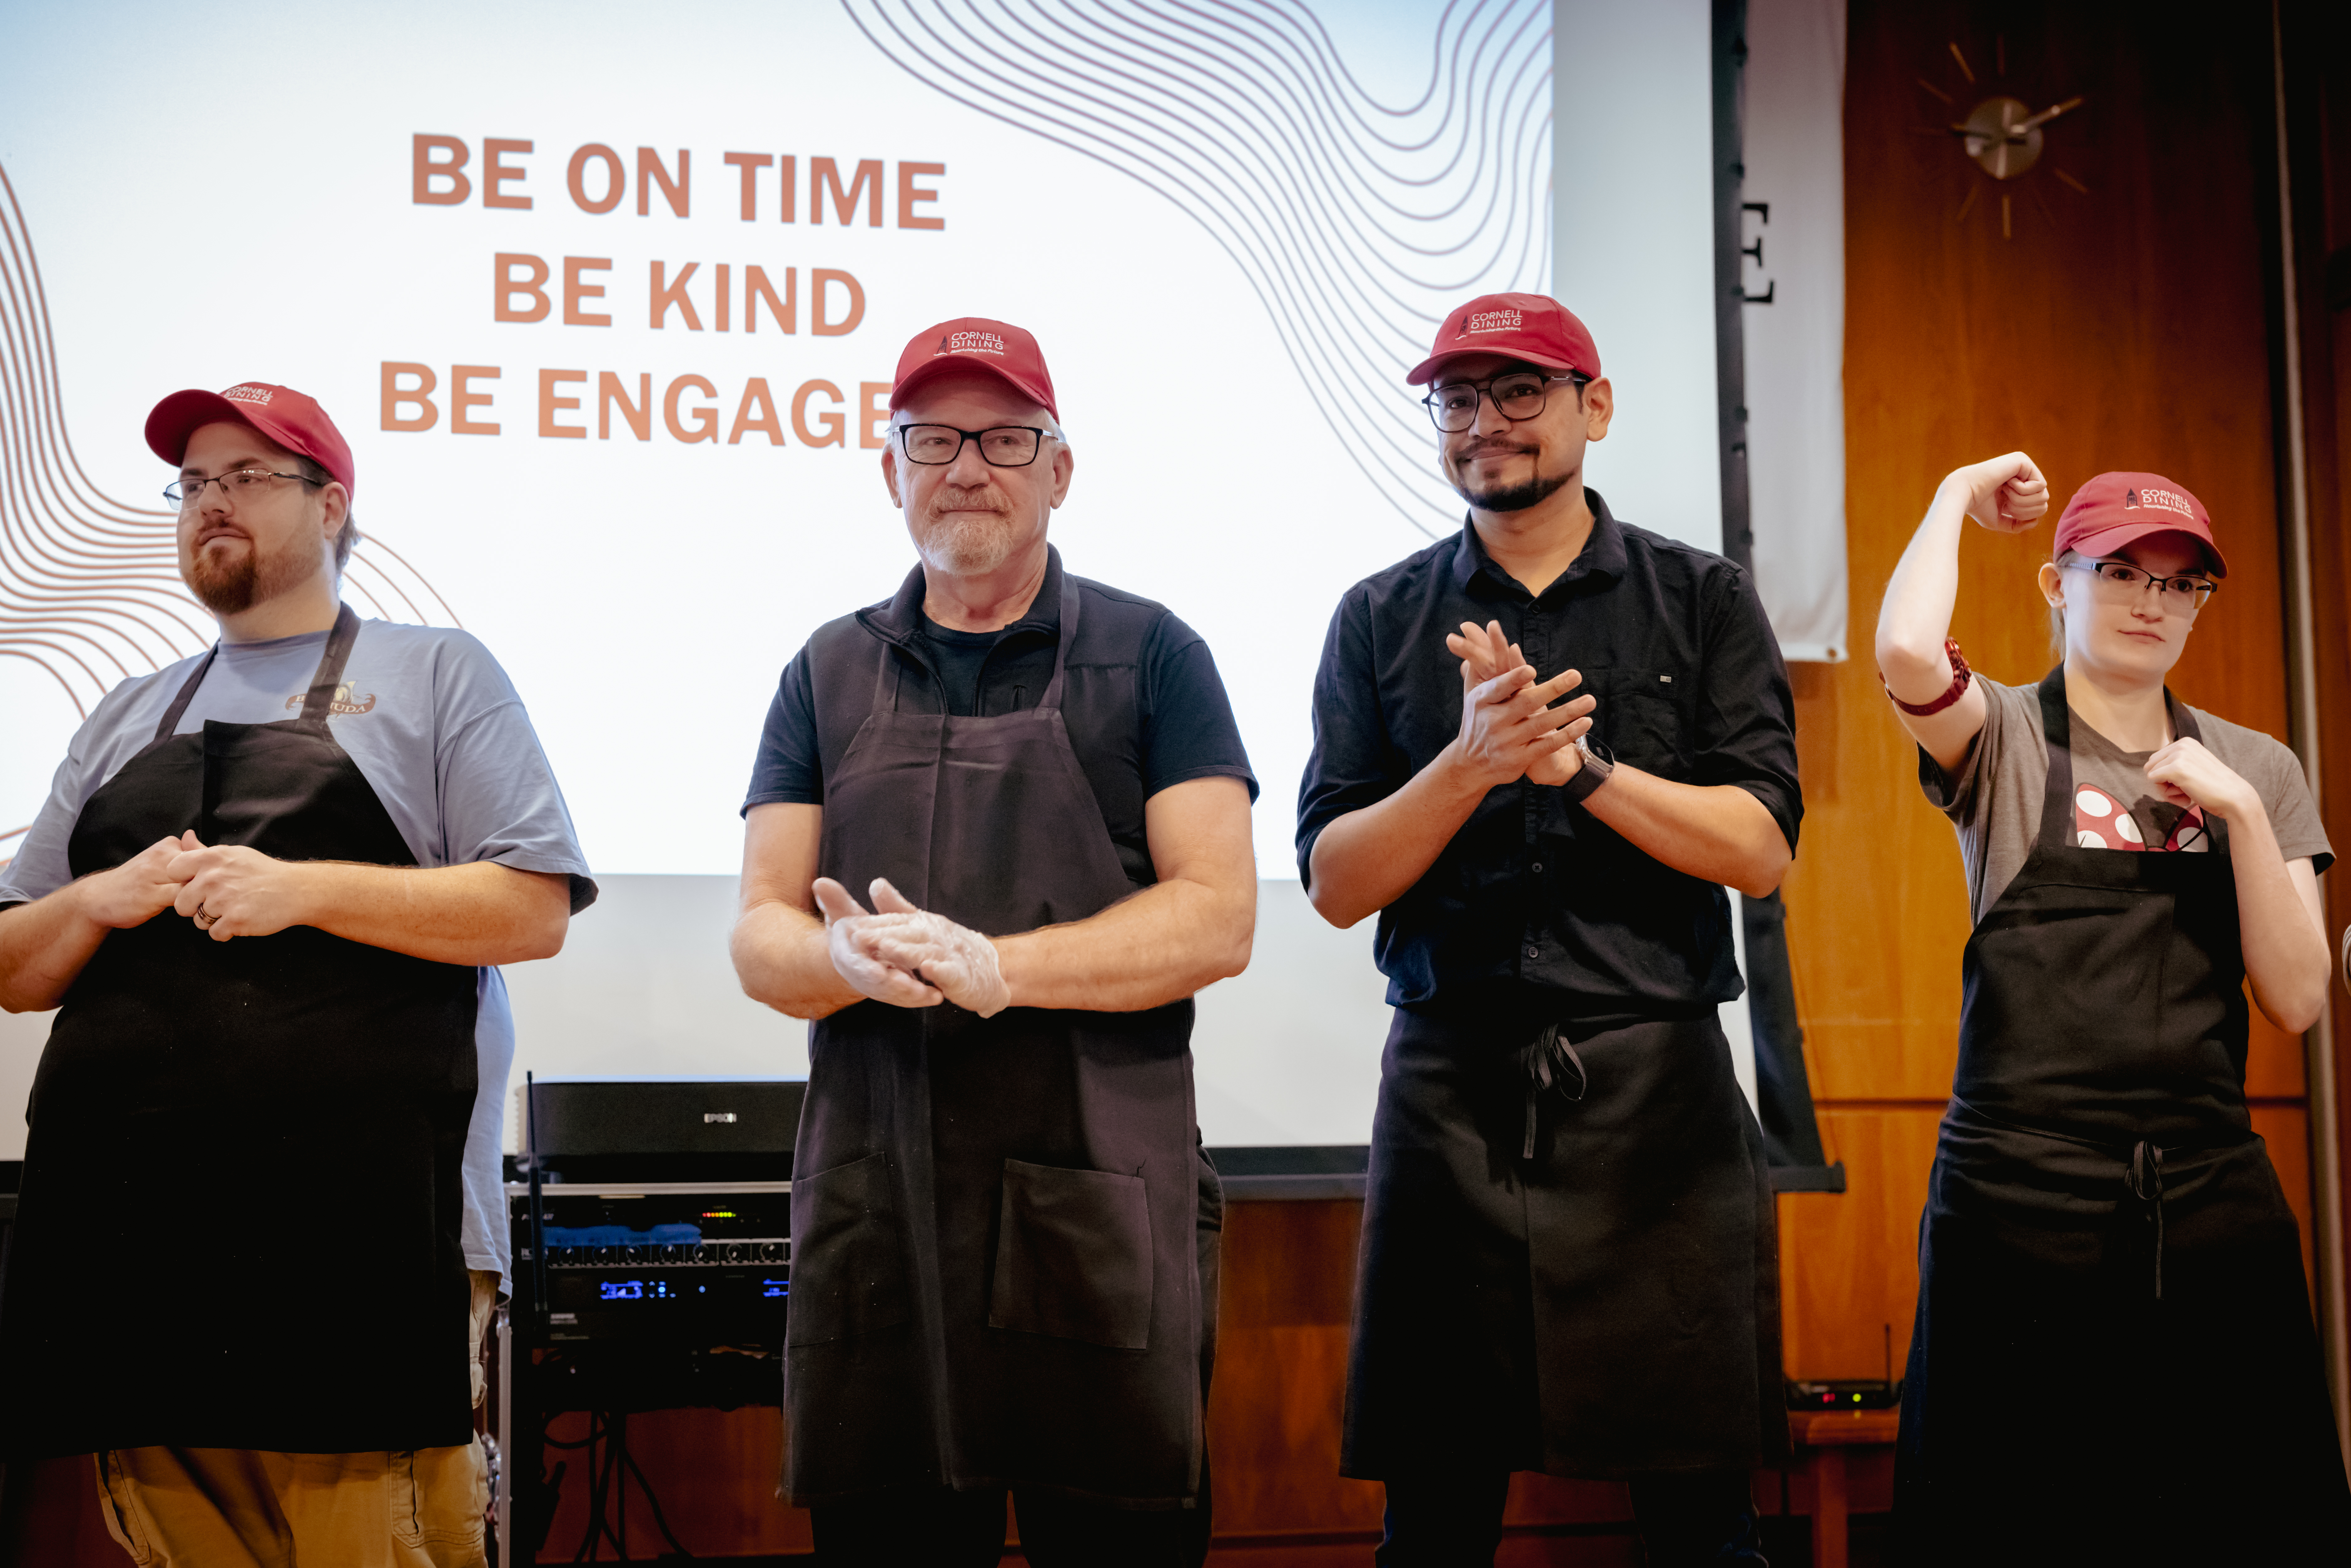 Cornell dining team members on stage at a training event